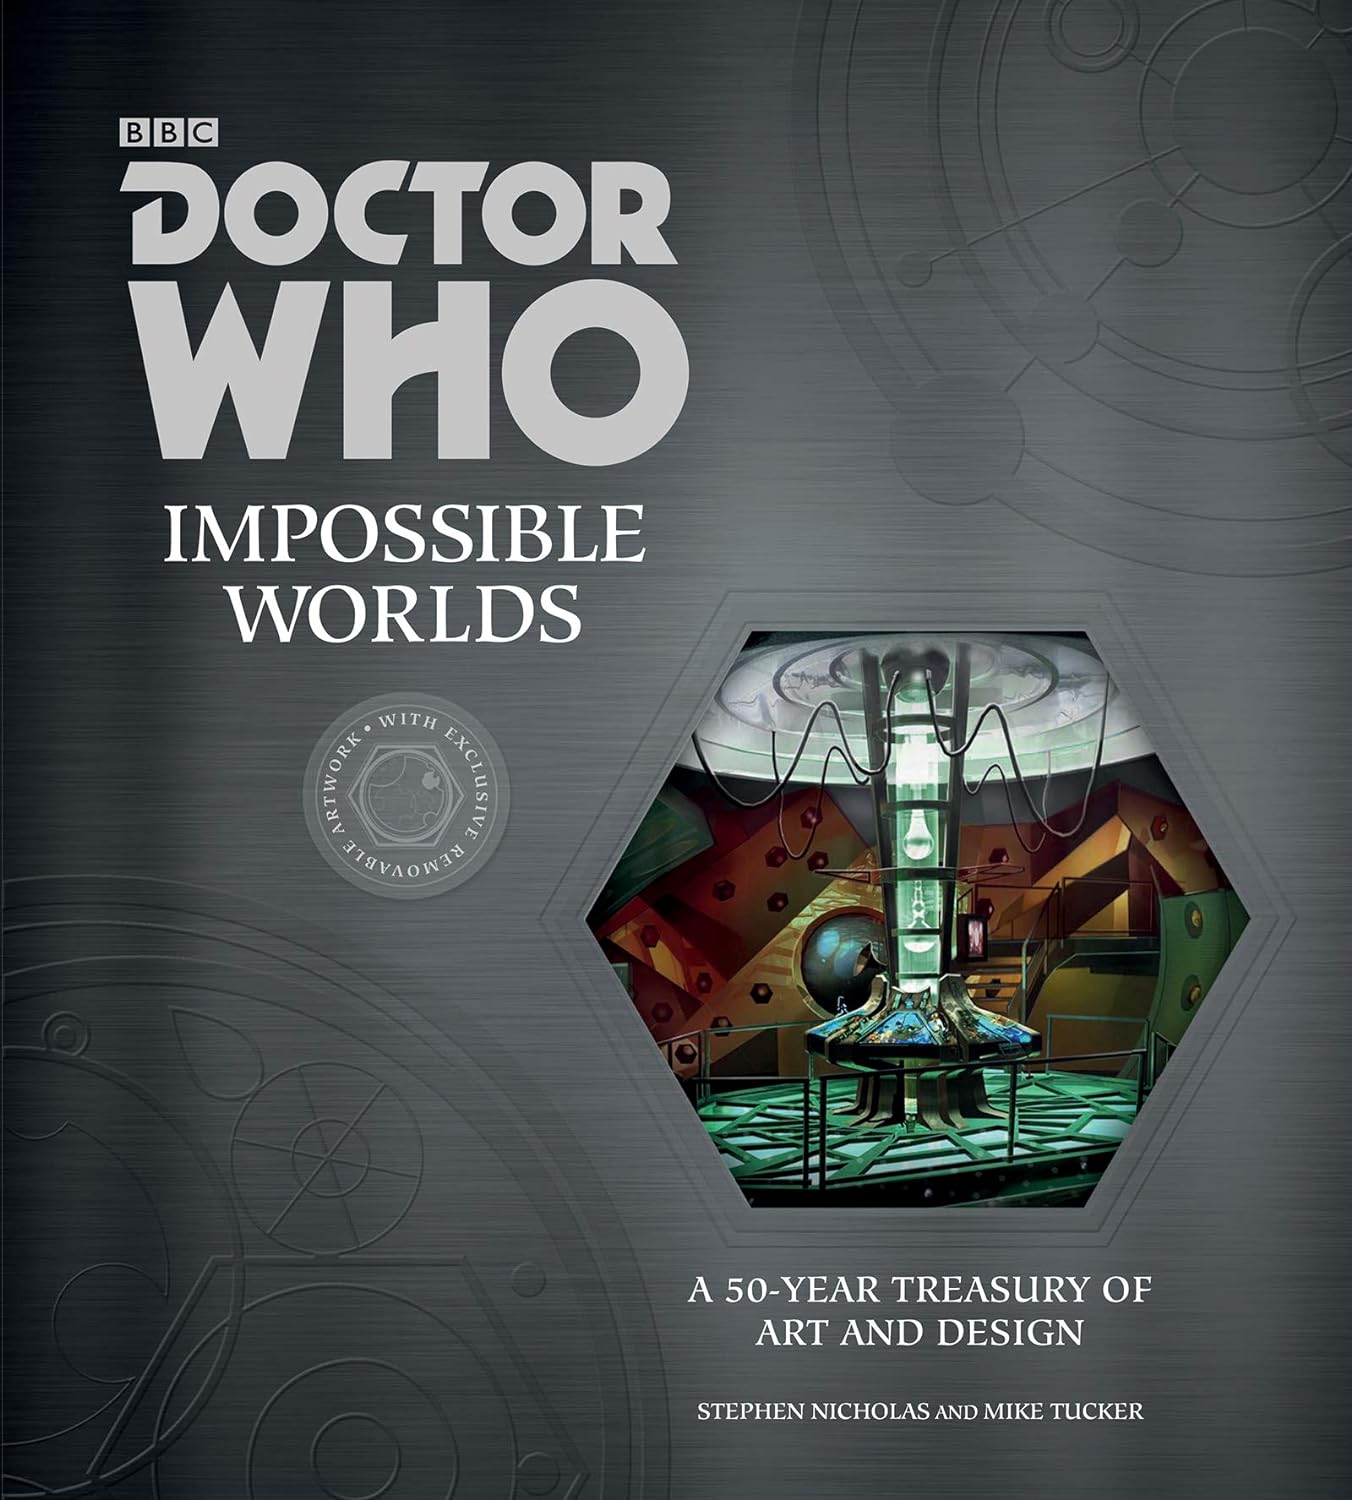 Doctor Who: Impossible Worlds: A 50-Year Treasury of Art and Design or Doctor Who: Whographica (Kindle eBook) $1.99 via Amazon